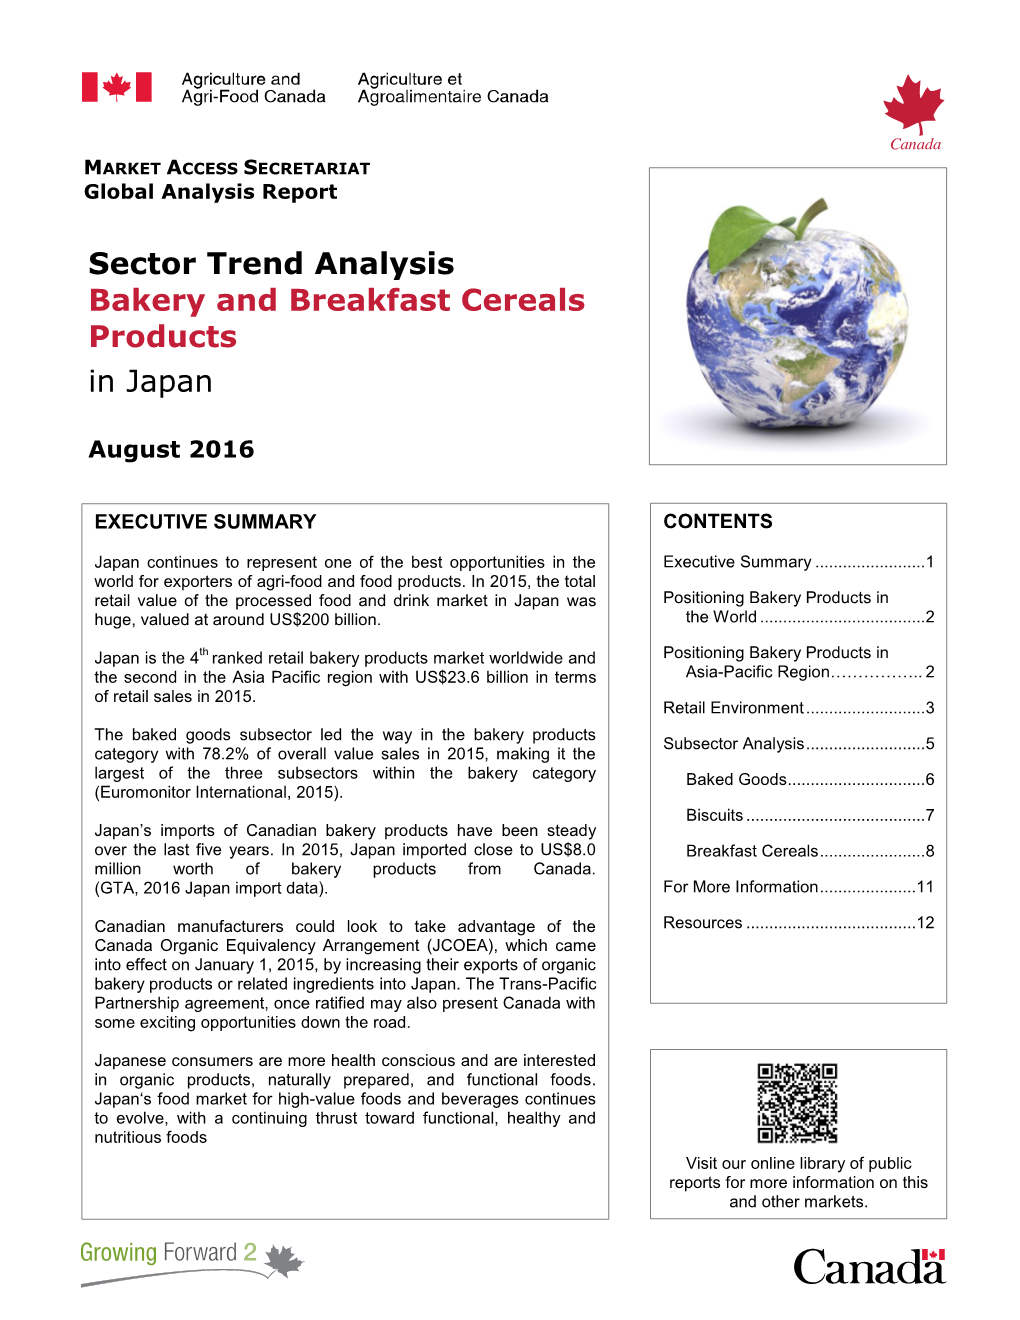 Sector Trend Analysis Bakery and Breakfast Cereals Products+ in Japan